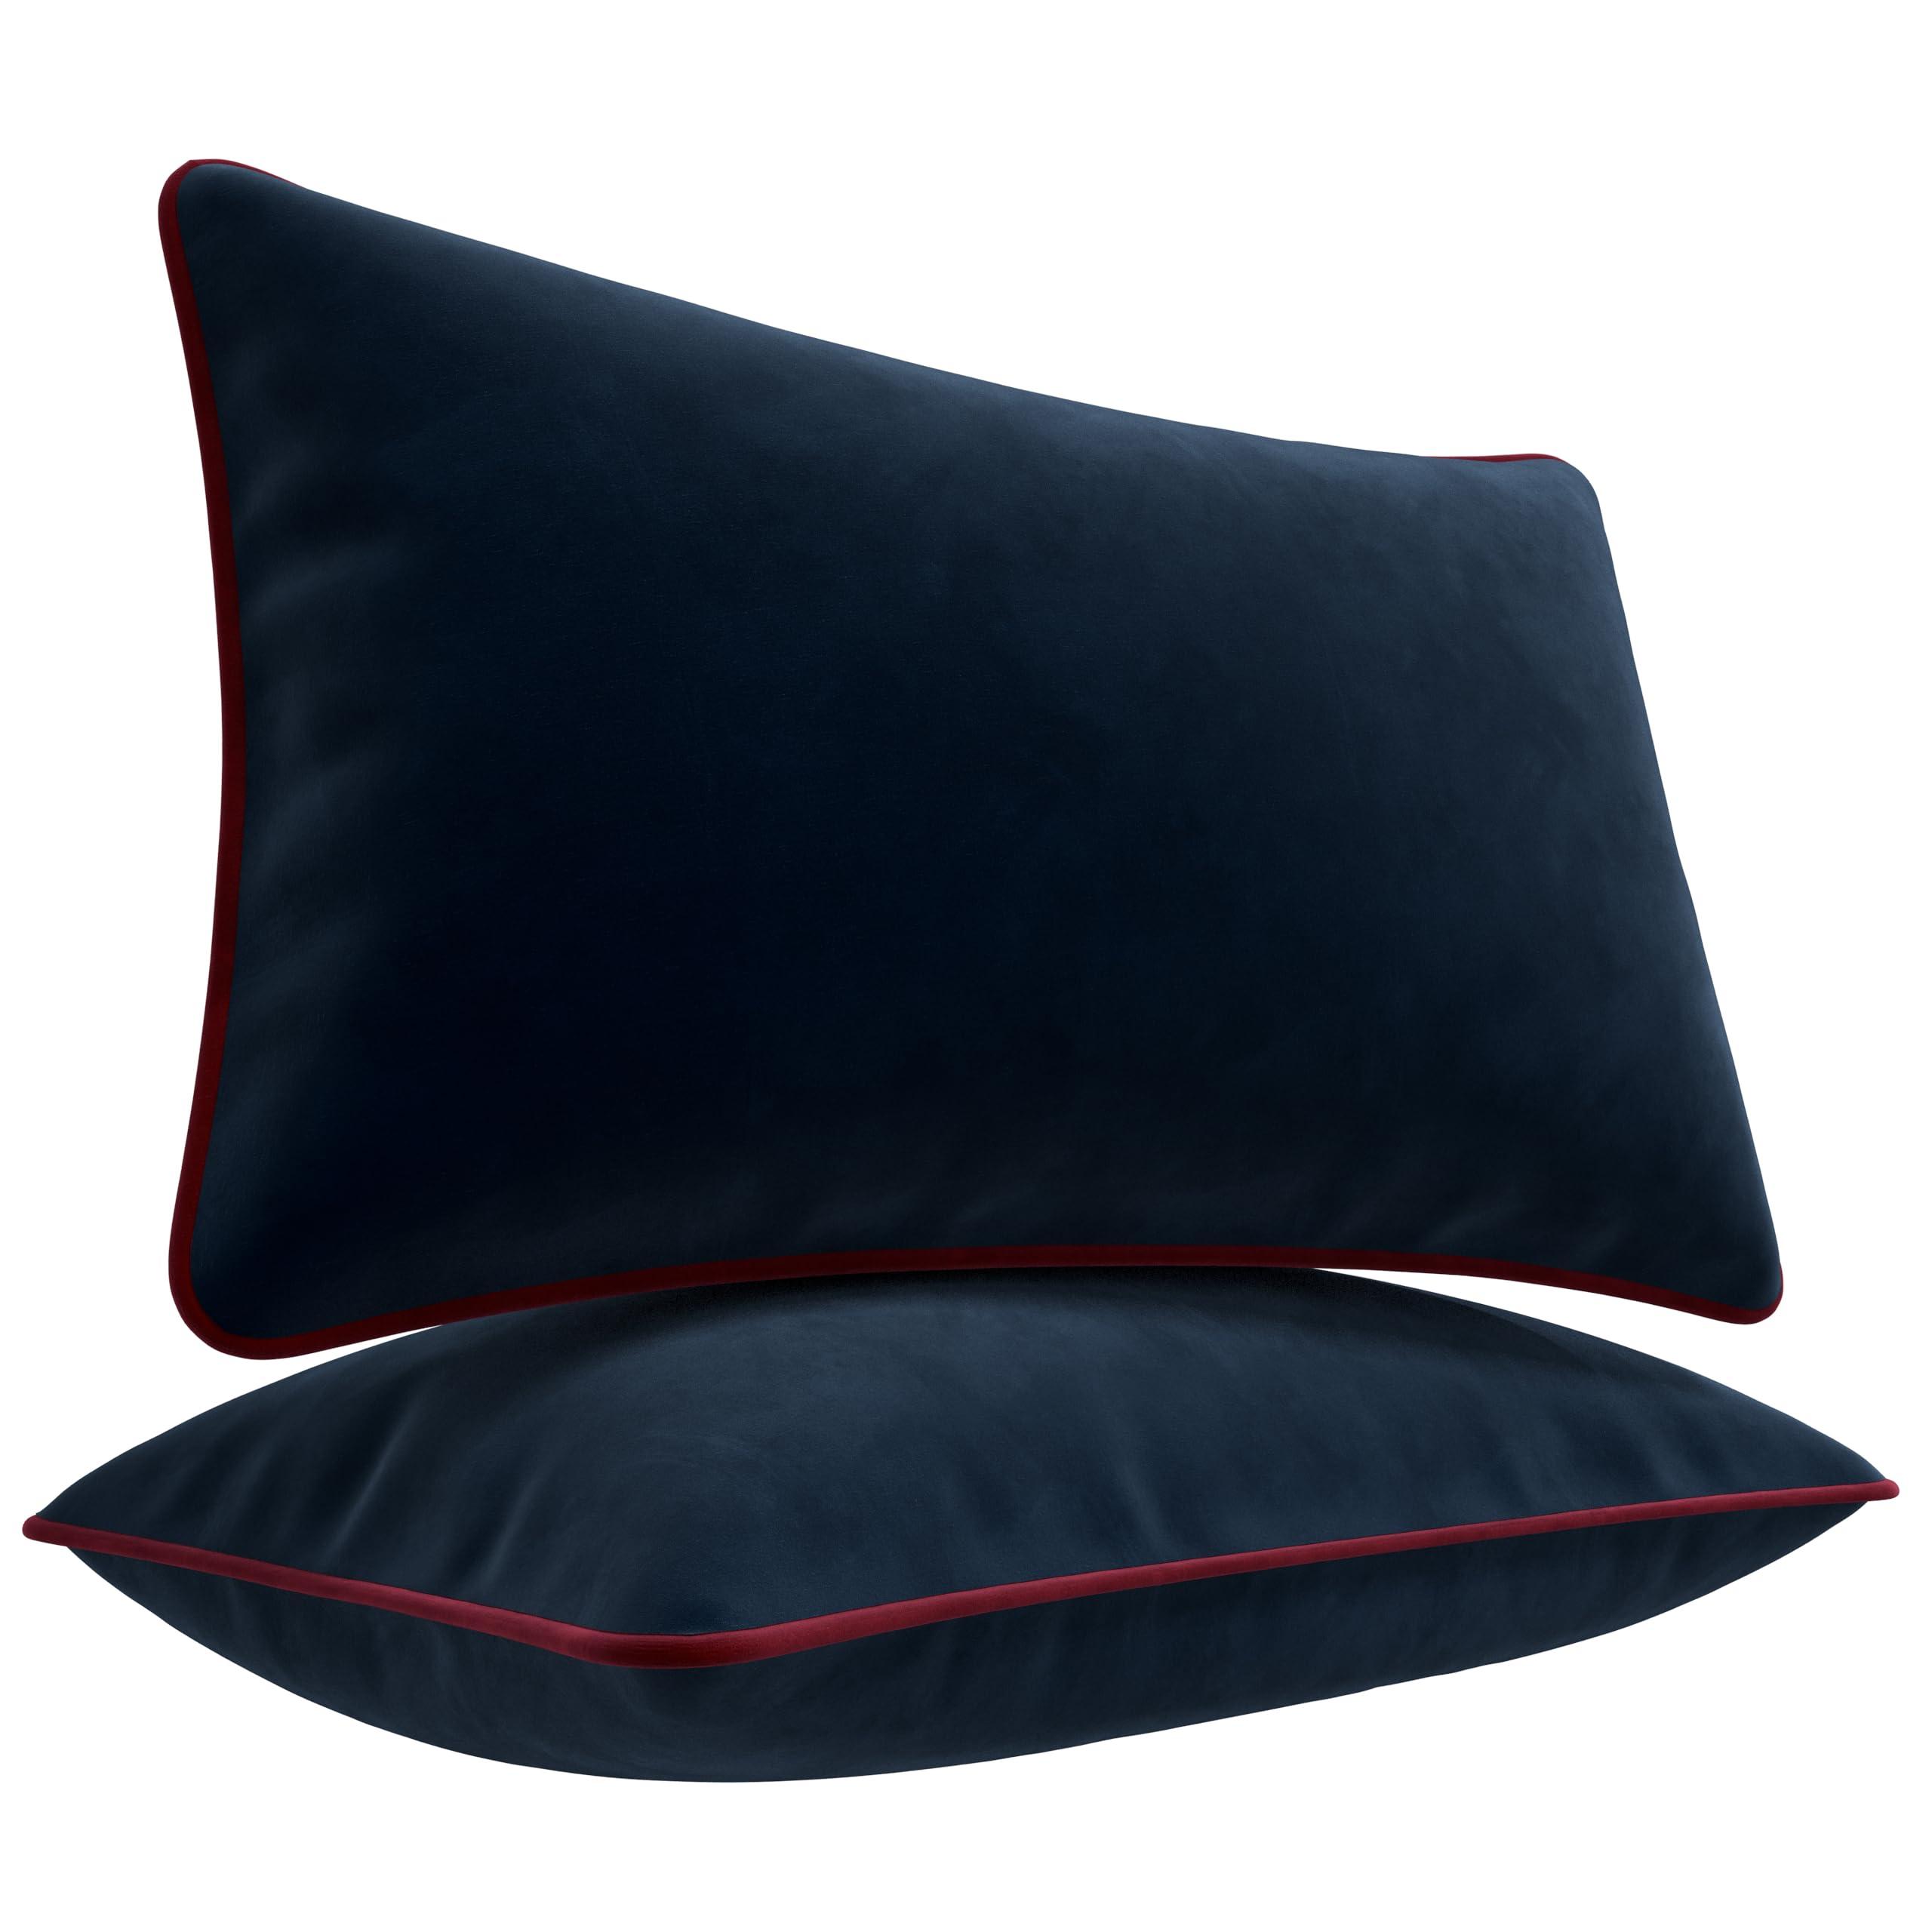 Blau Marité Set of 2 Decorative Cushion Covers. Model: OXFORD. Made of extra-soft velvet. Filling not included. (12x20 (30x50cm), Royal Blue) 0